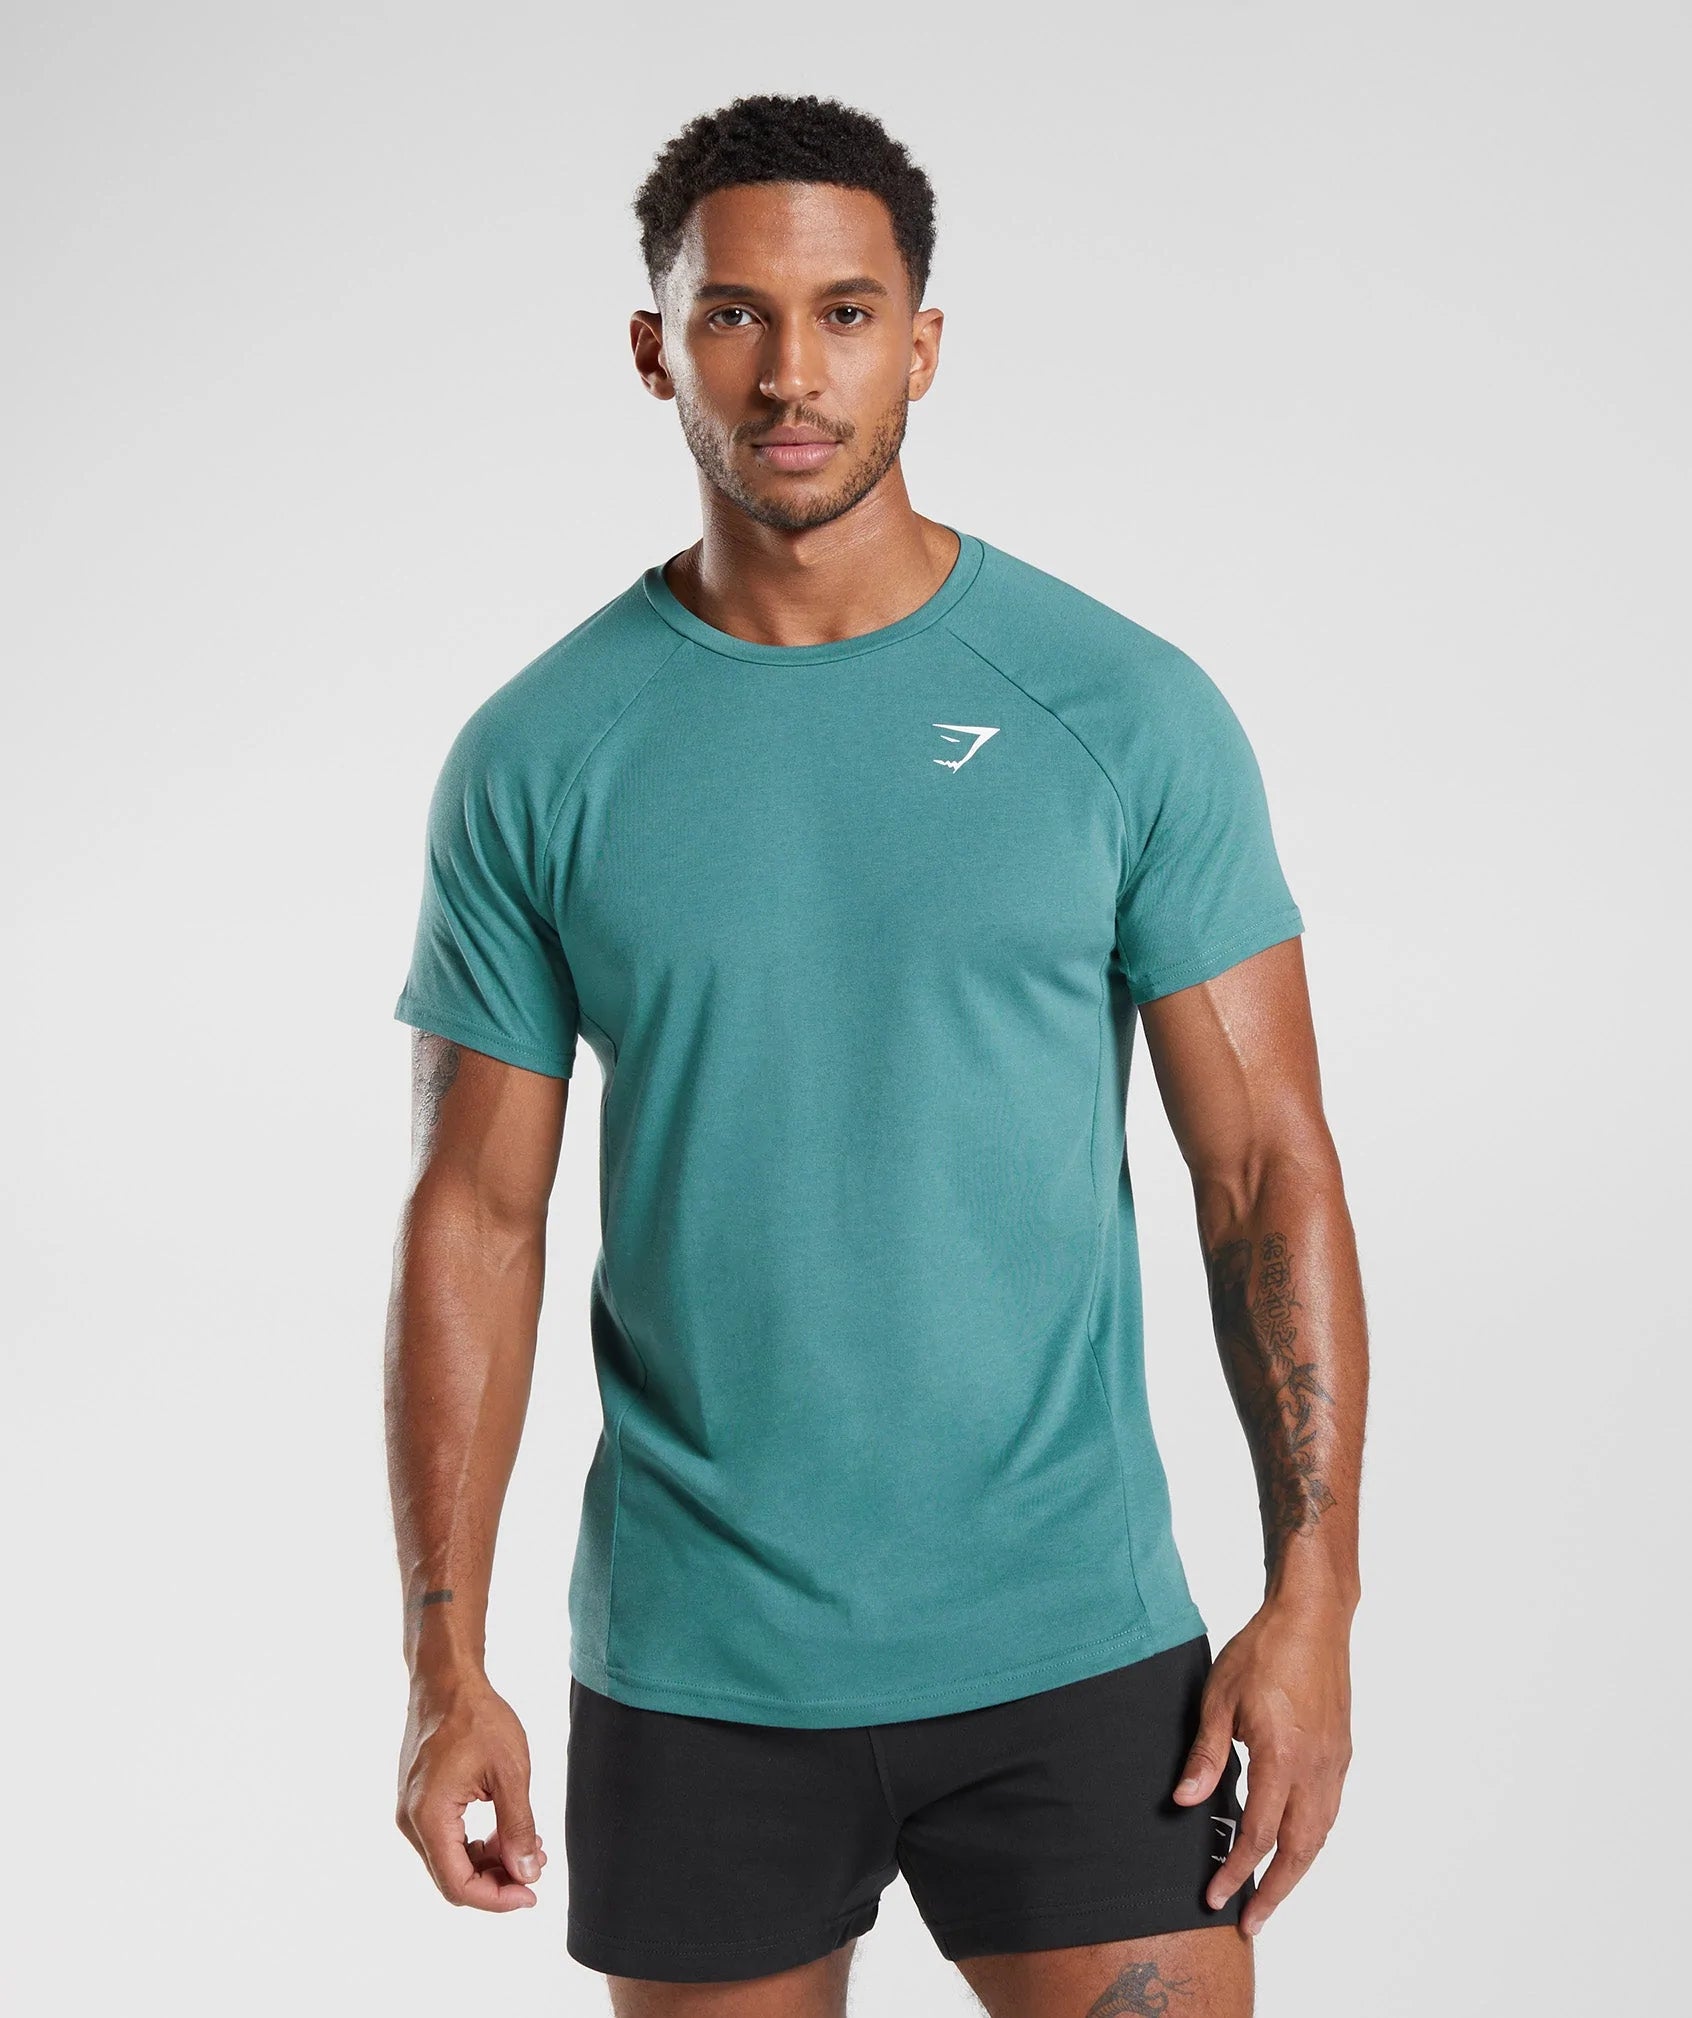 GYMSHARK Men Fitness Gym Workout T-shirt Breathable Tight Tshirt